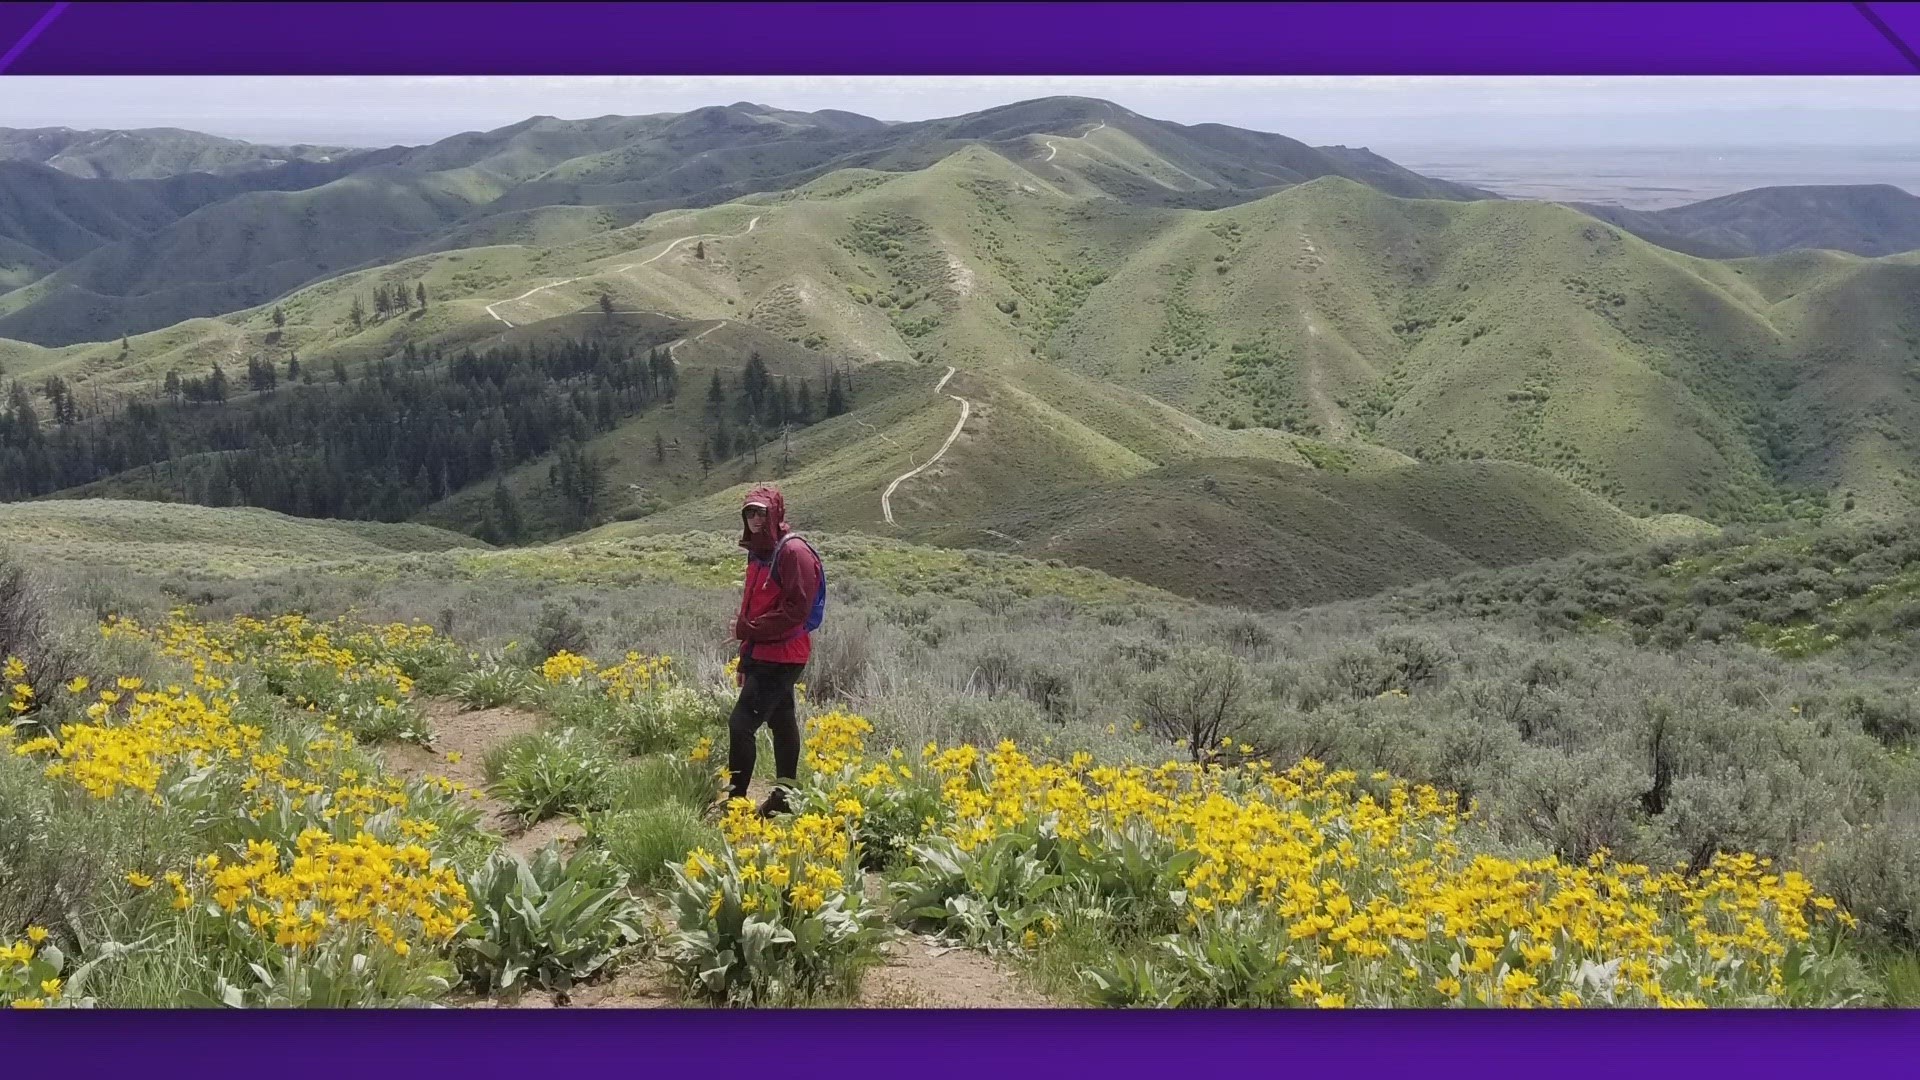 With over 10k miles of trails in Idaho, professional tour guide and Idaho outdoor author, Steve Stuebner, on how to make the most of summer camping, hiking and fun.